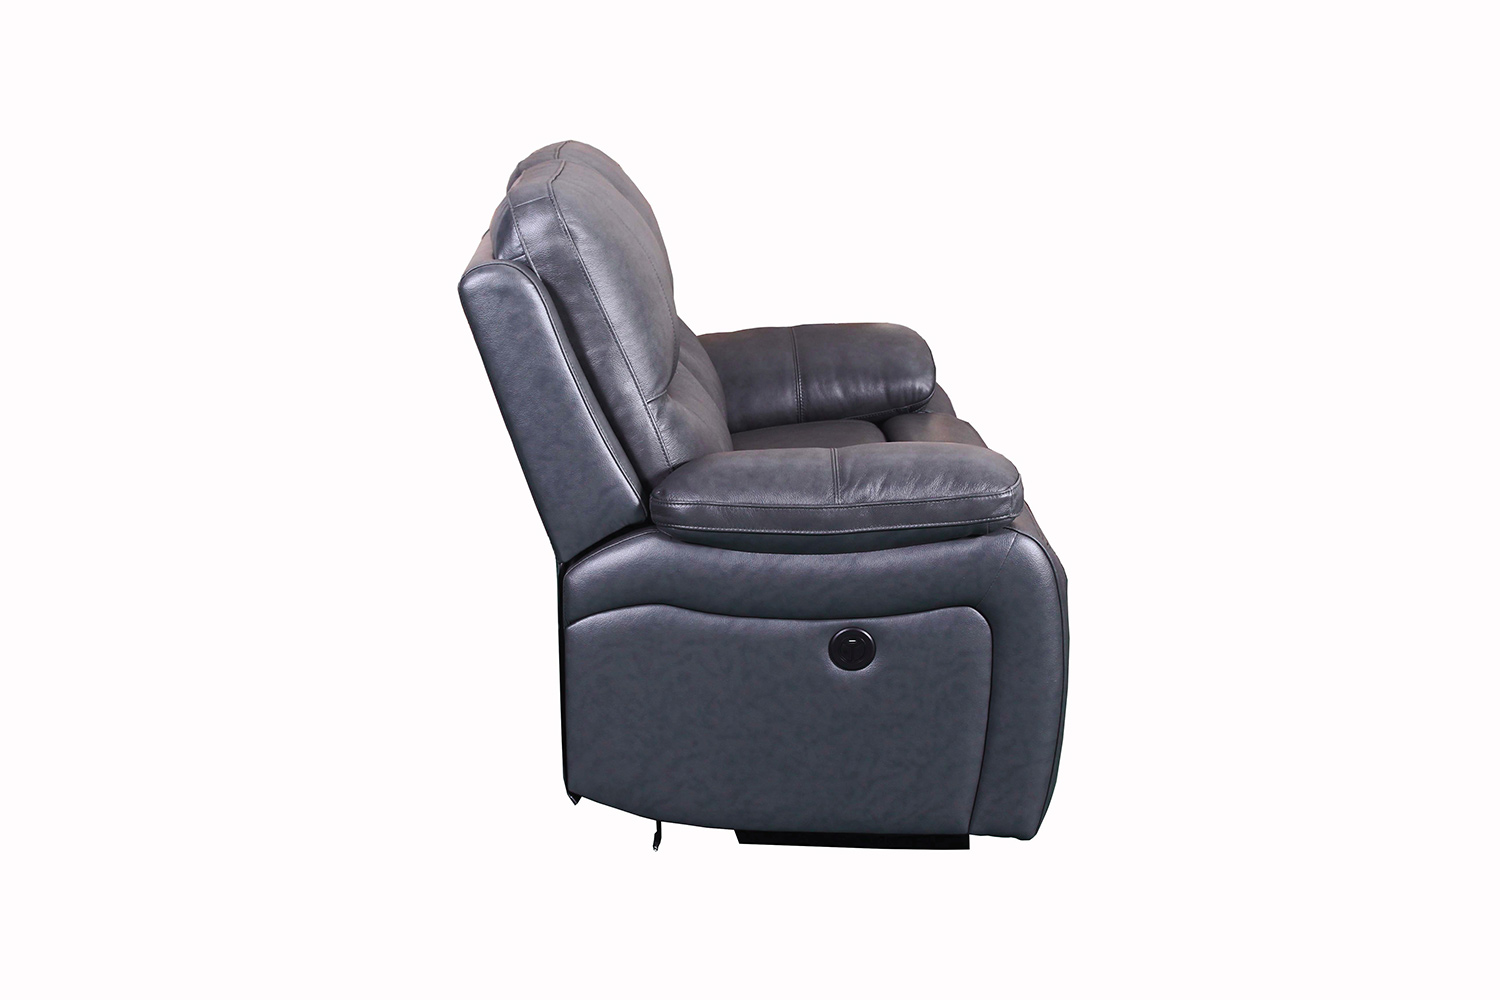 Barcalounger Carter Power Reclining Loveseat - Toby Gray/Leather Match